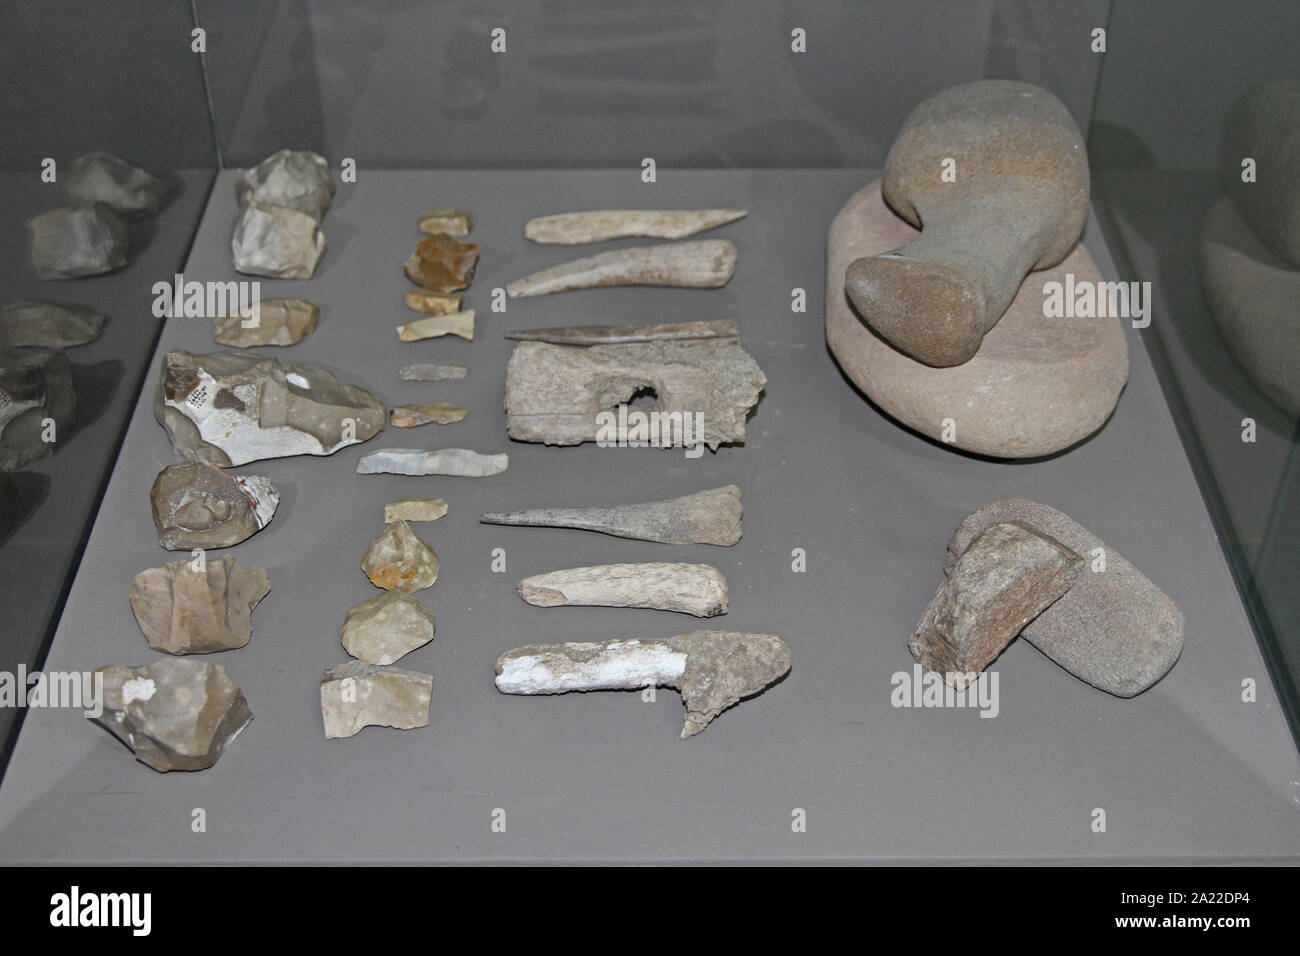 Collection of Ancient prehistoric dug up fossil stone tools, knives, daggers, etc in enclosed glass display at National Archaeological Museum Djerdap, Kladovo, Serbia. Stock Photo